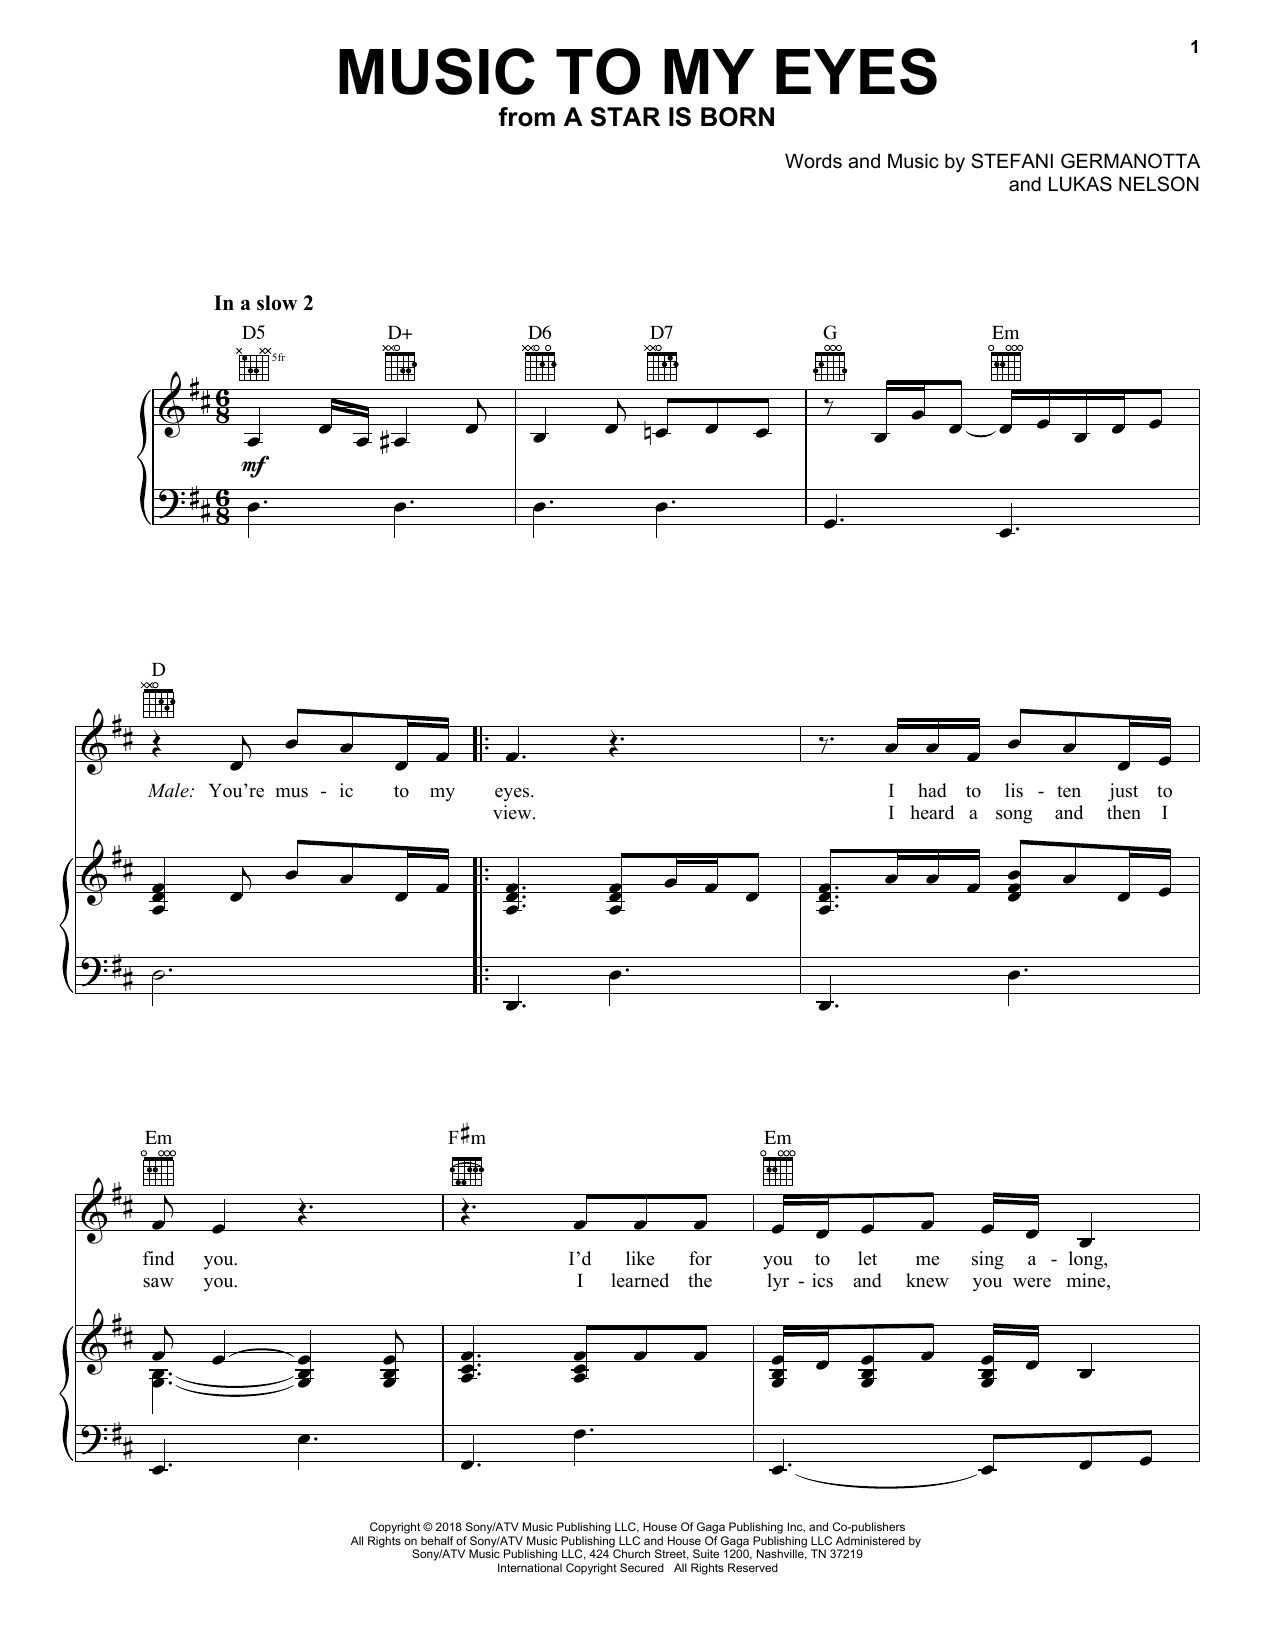 Download Lady Gaga & Bradley Cooper Music To My Eyes (from A Star Is Born) Sheet Music